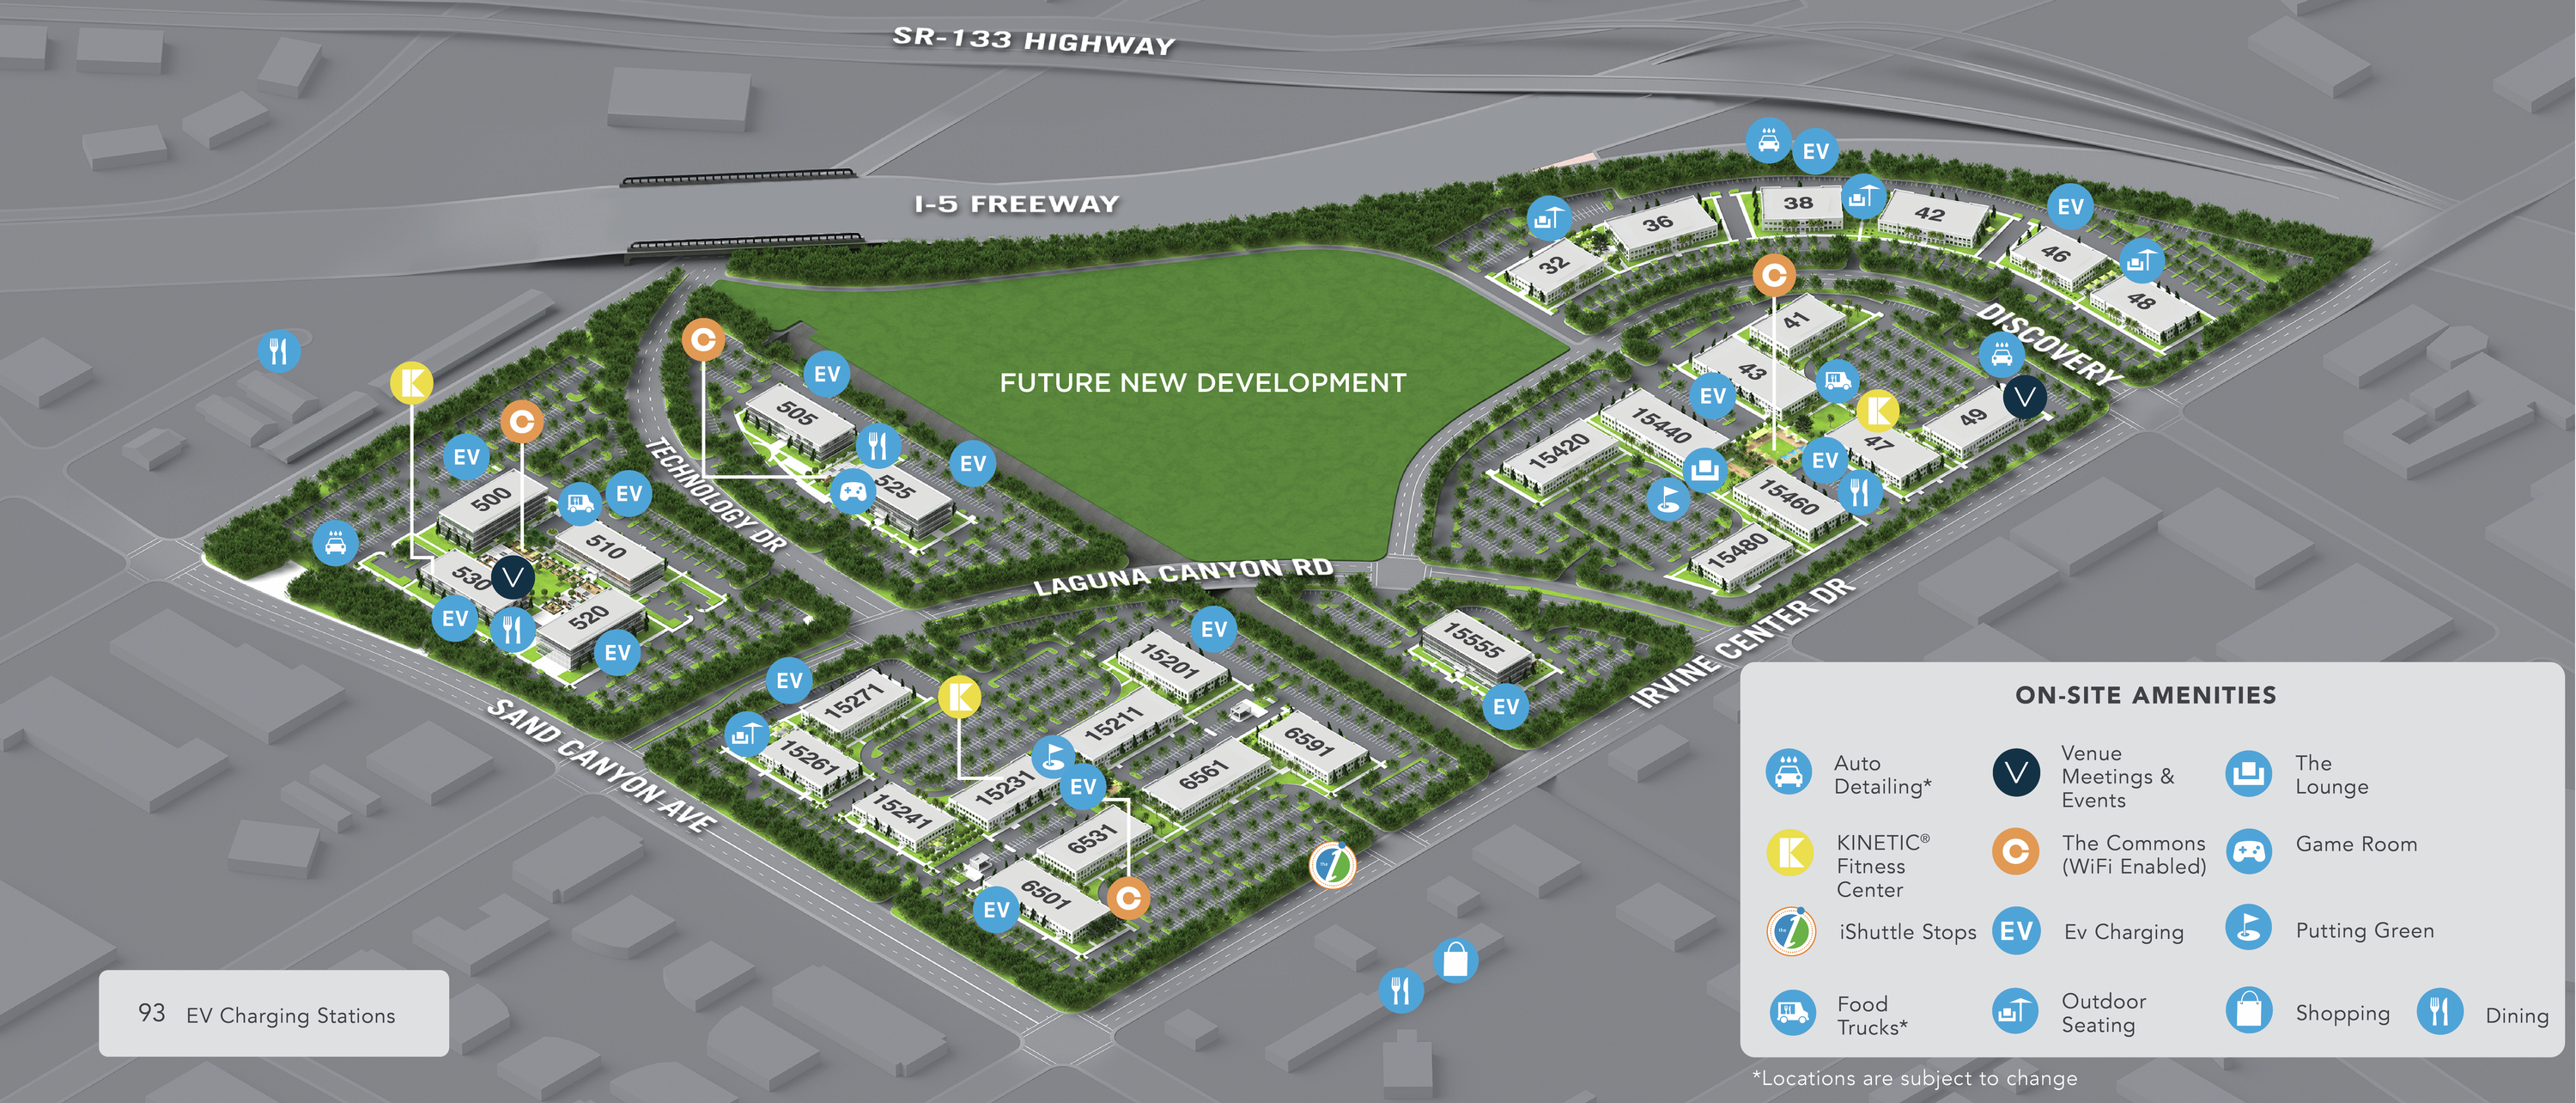 Discovery Park Site Plan